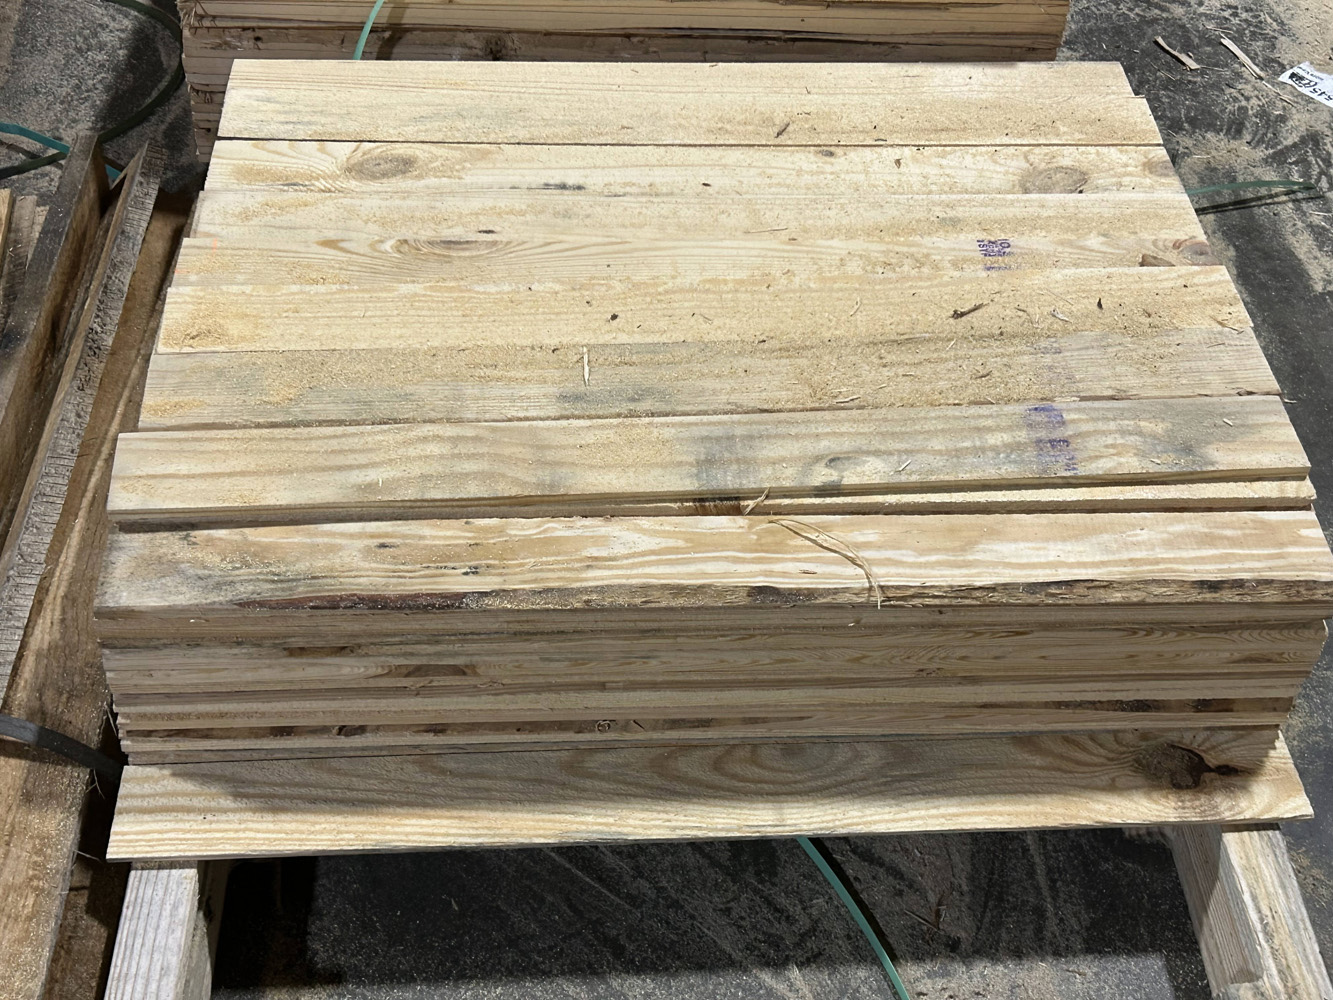 New Deck Boards for New Pallets